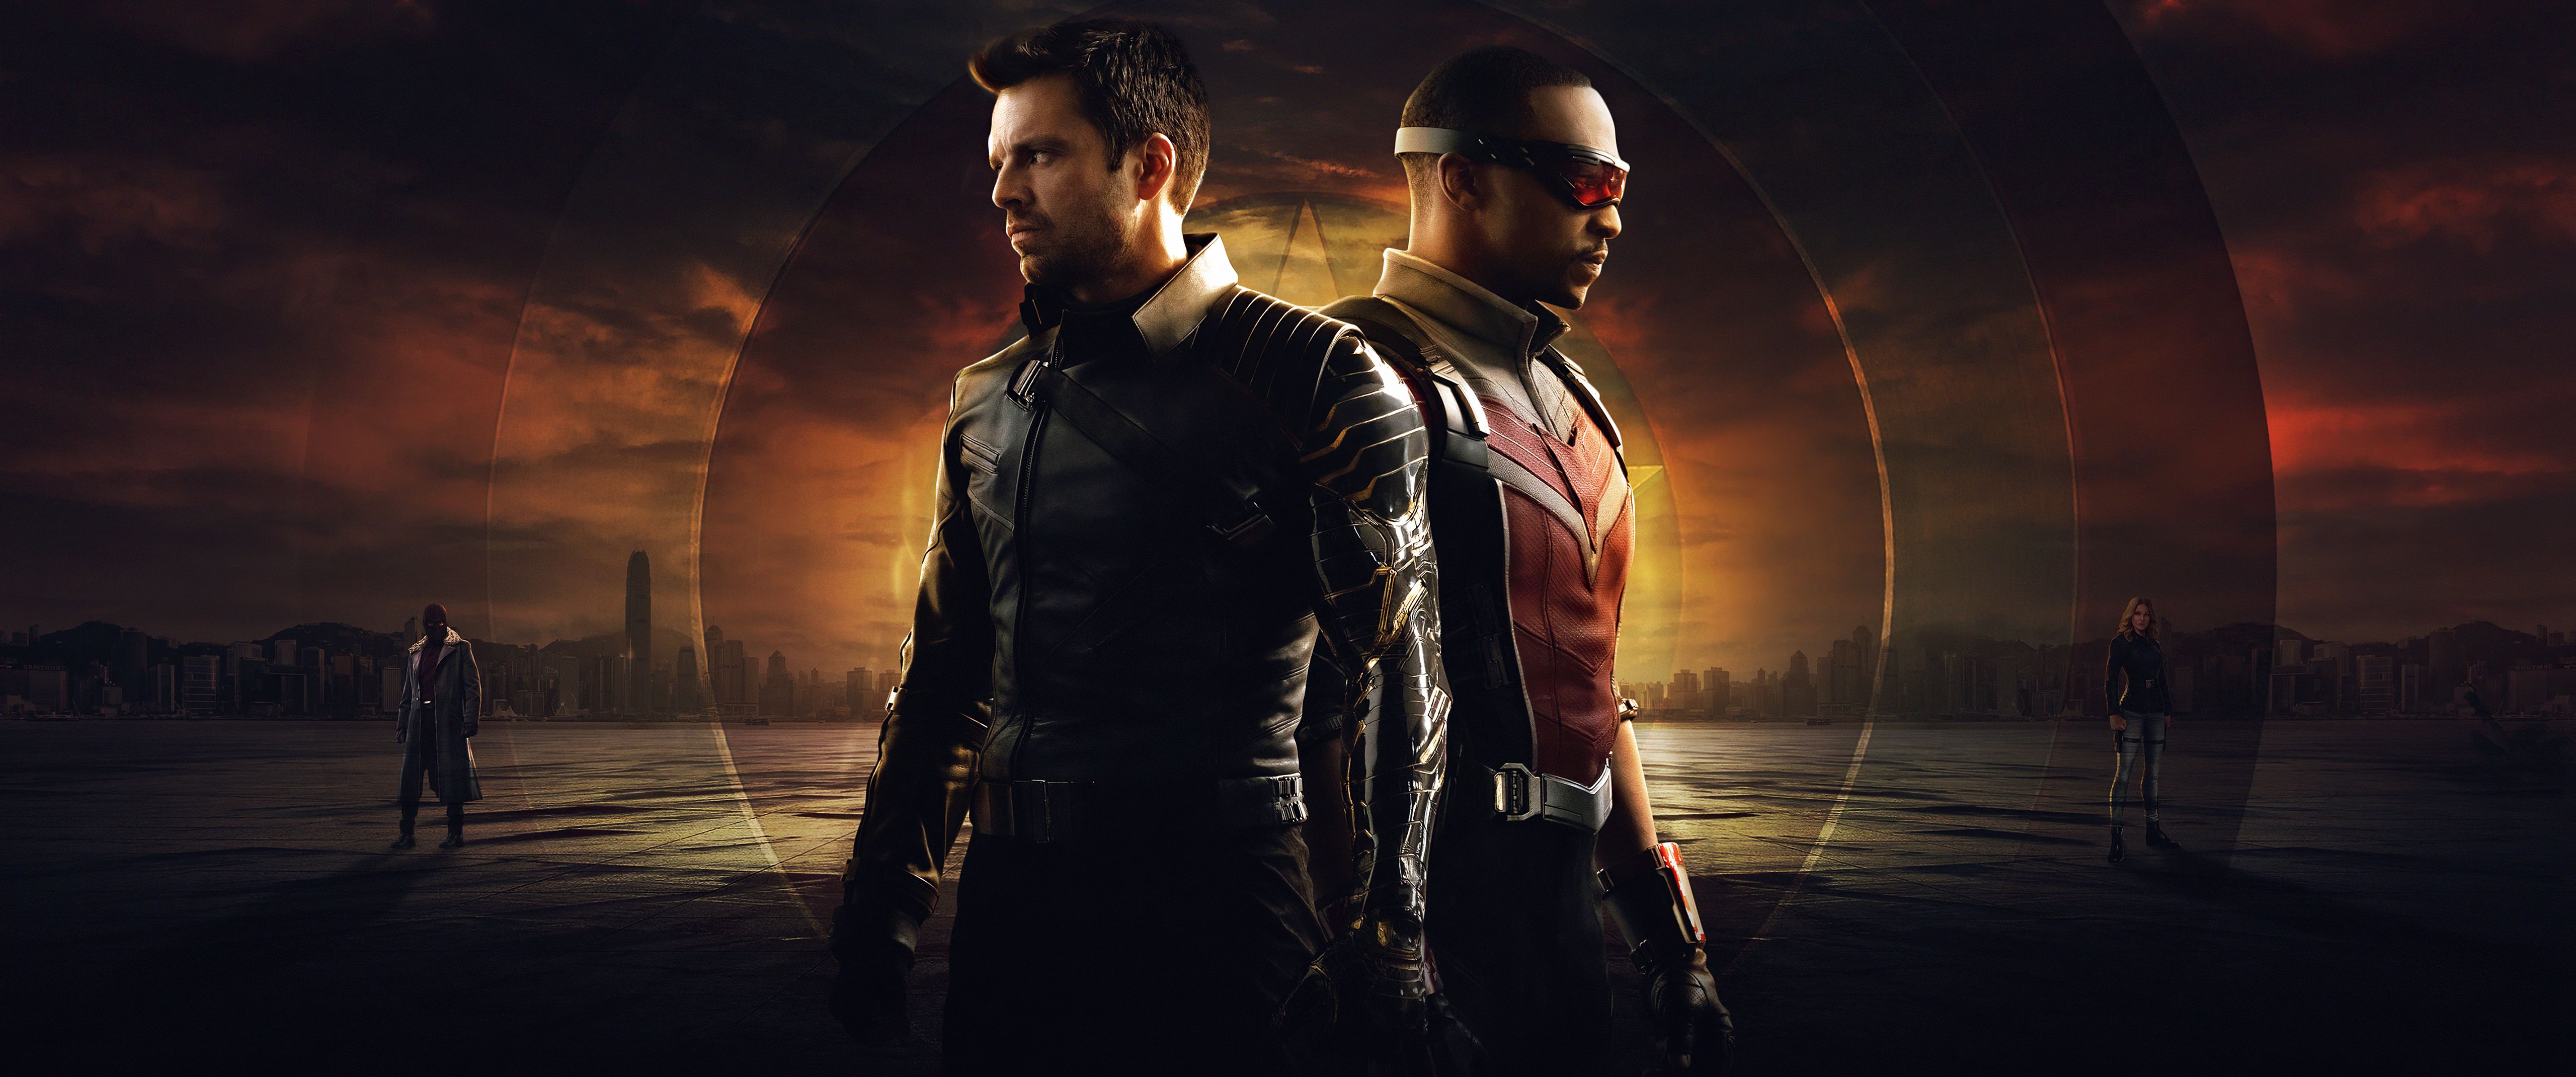 The Falcon and the Winter Soldier 4K Wallpaper, TV series, Bucky Barnes, Sam Wilson, Marvel Comics, Movies